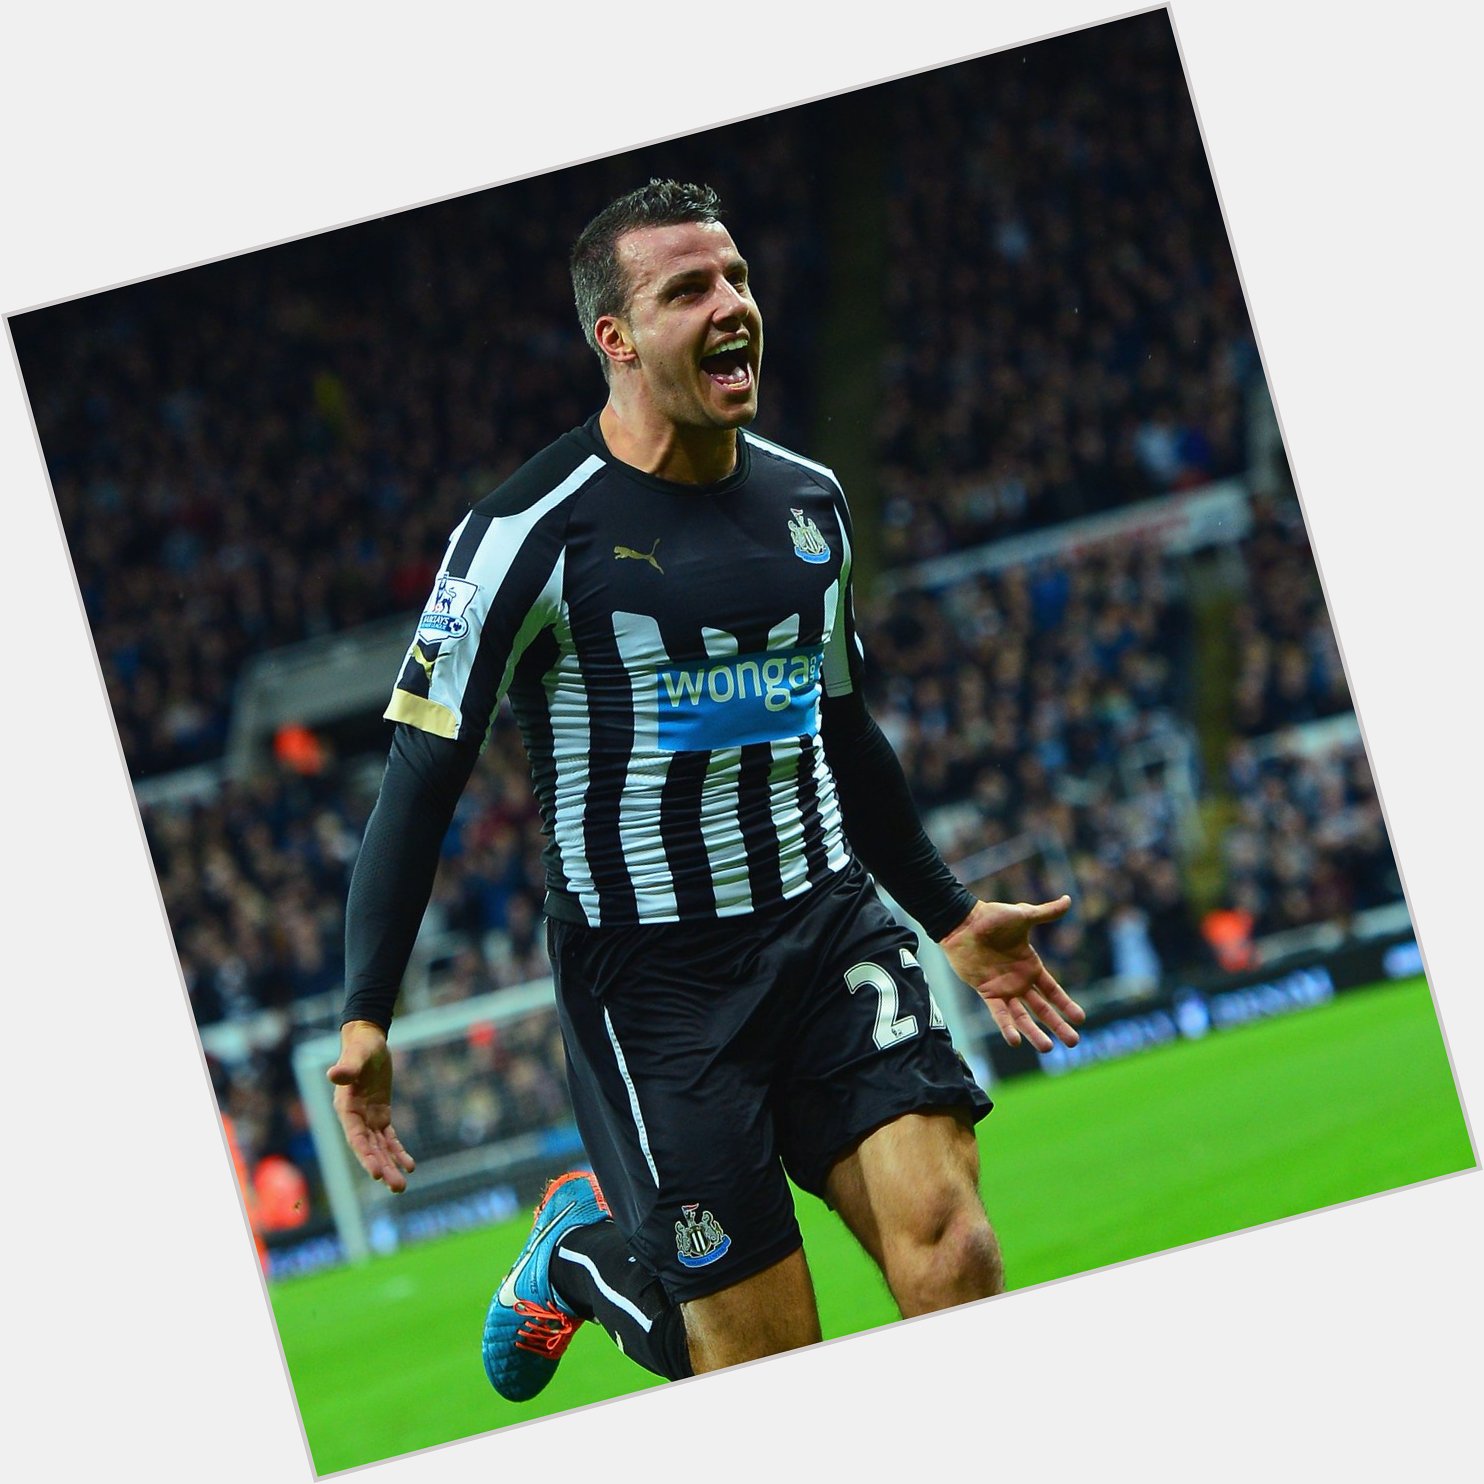 A very happy birthday to Steven Taylor!    